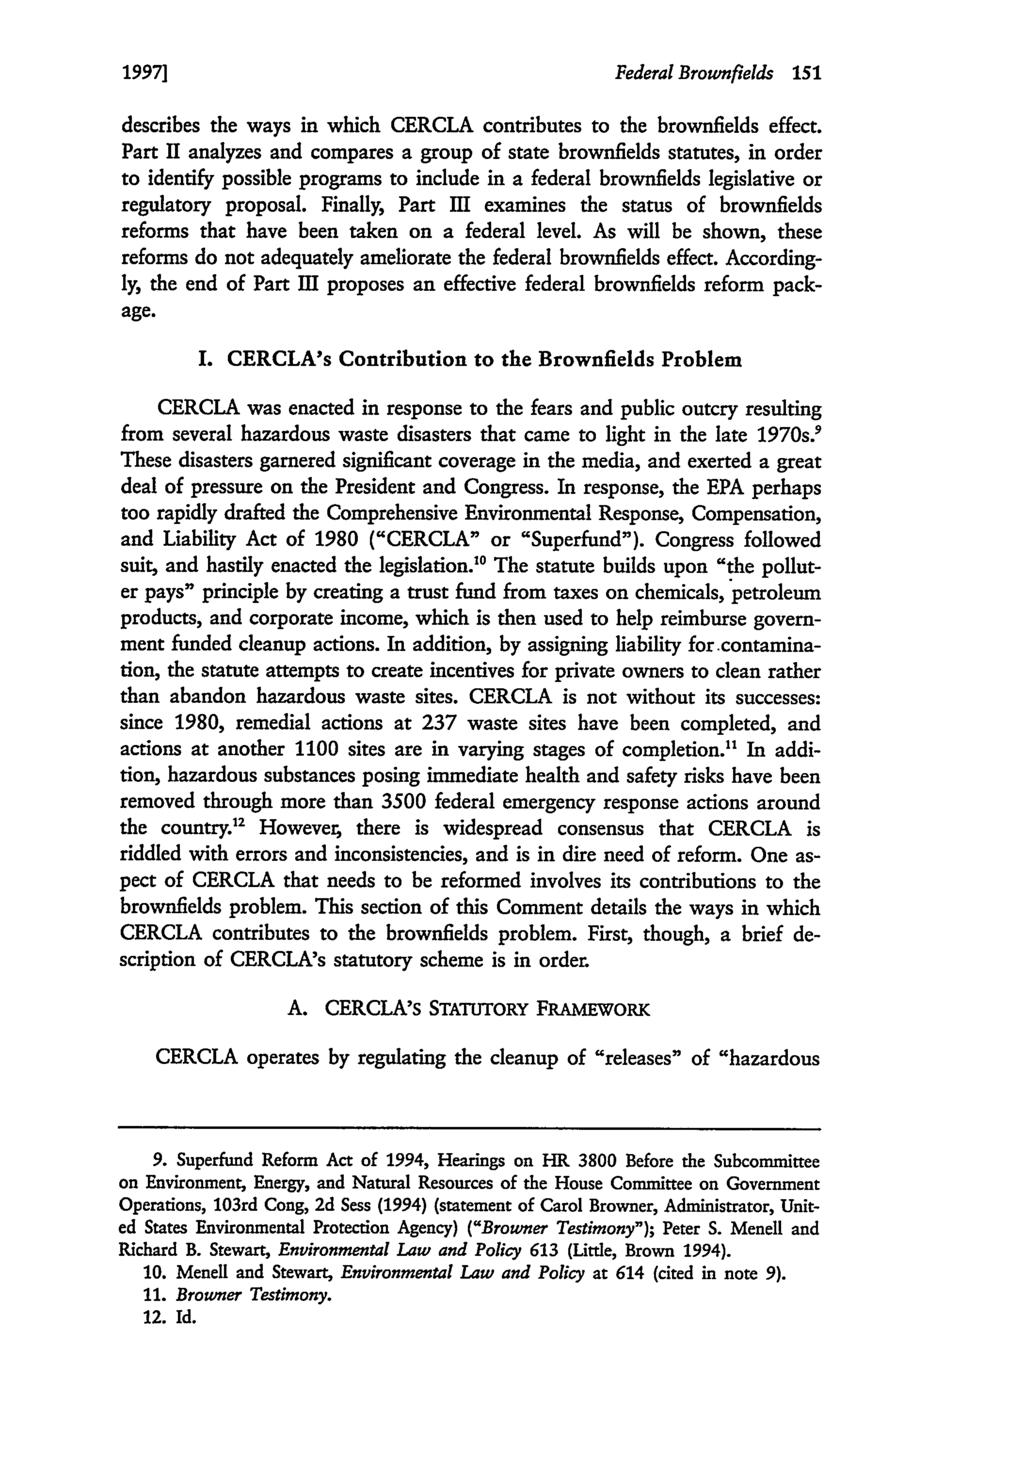 1997] Federal Brownfields 151 describes the ways in which CERCLA contributes to the brownfields effect.